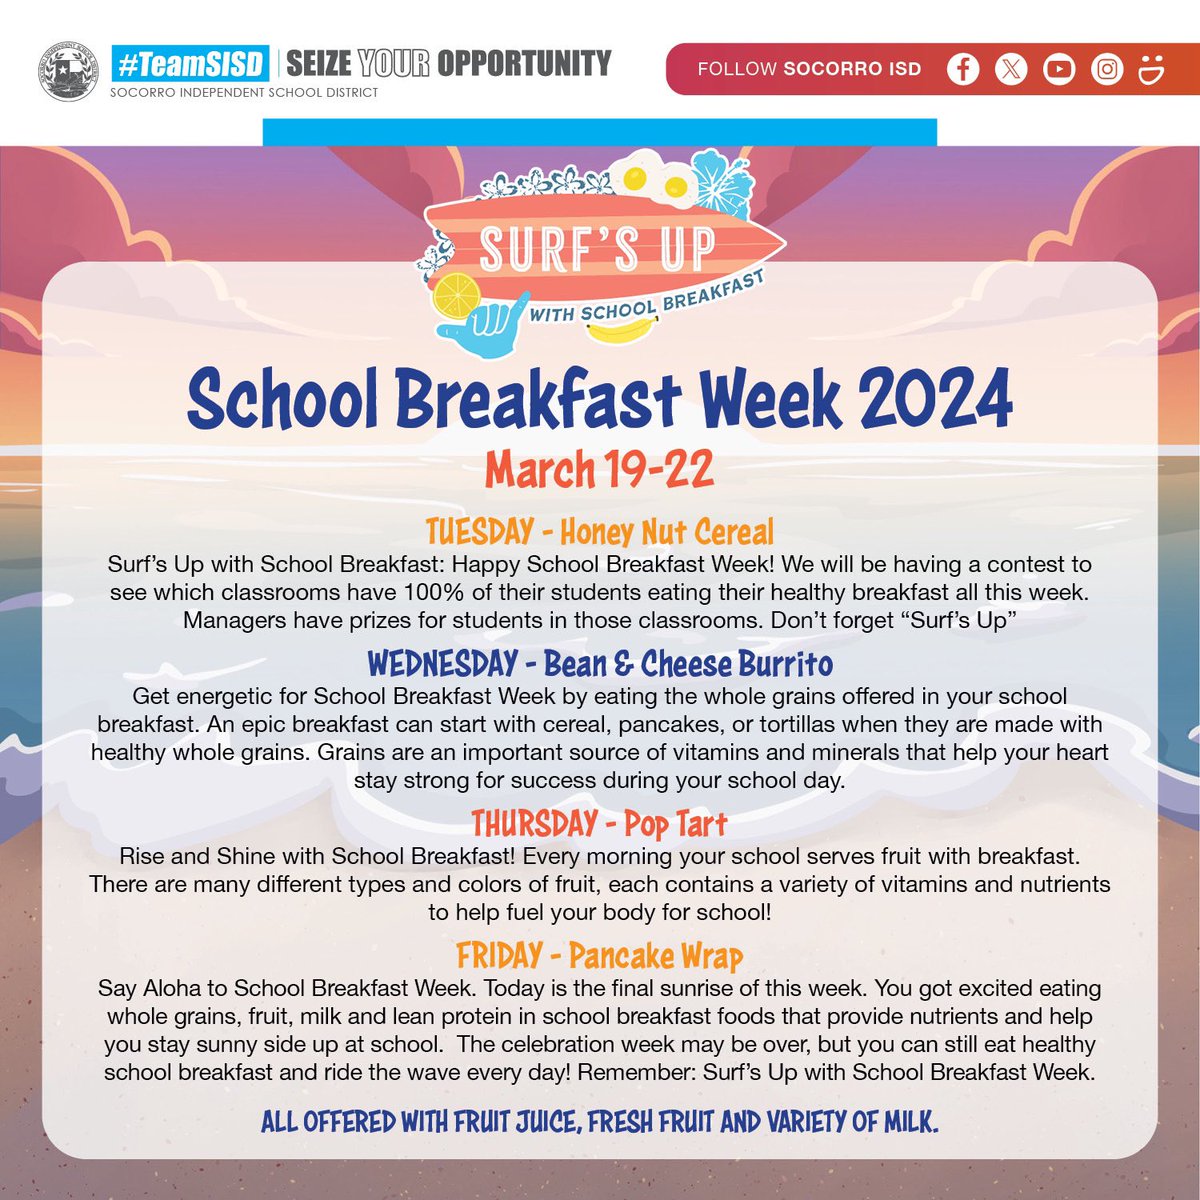 School Breakfast week starts tomorrow!!! See the great things happening with CNS!